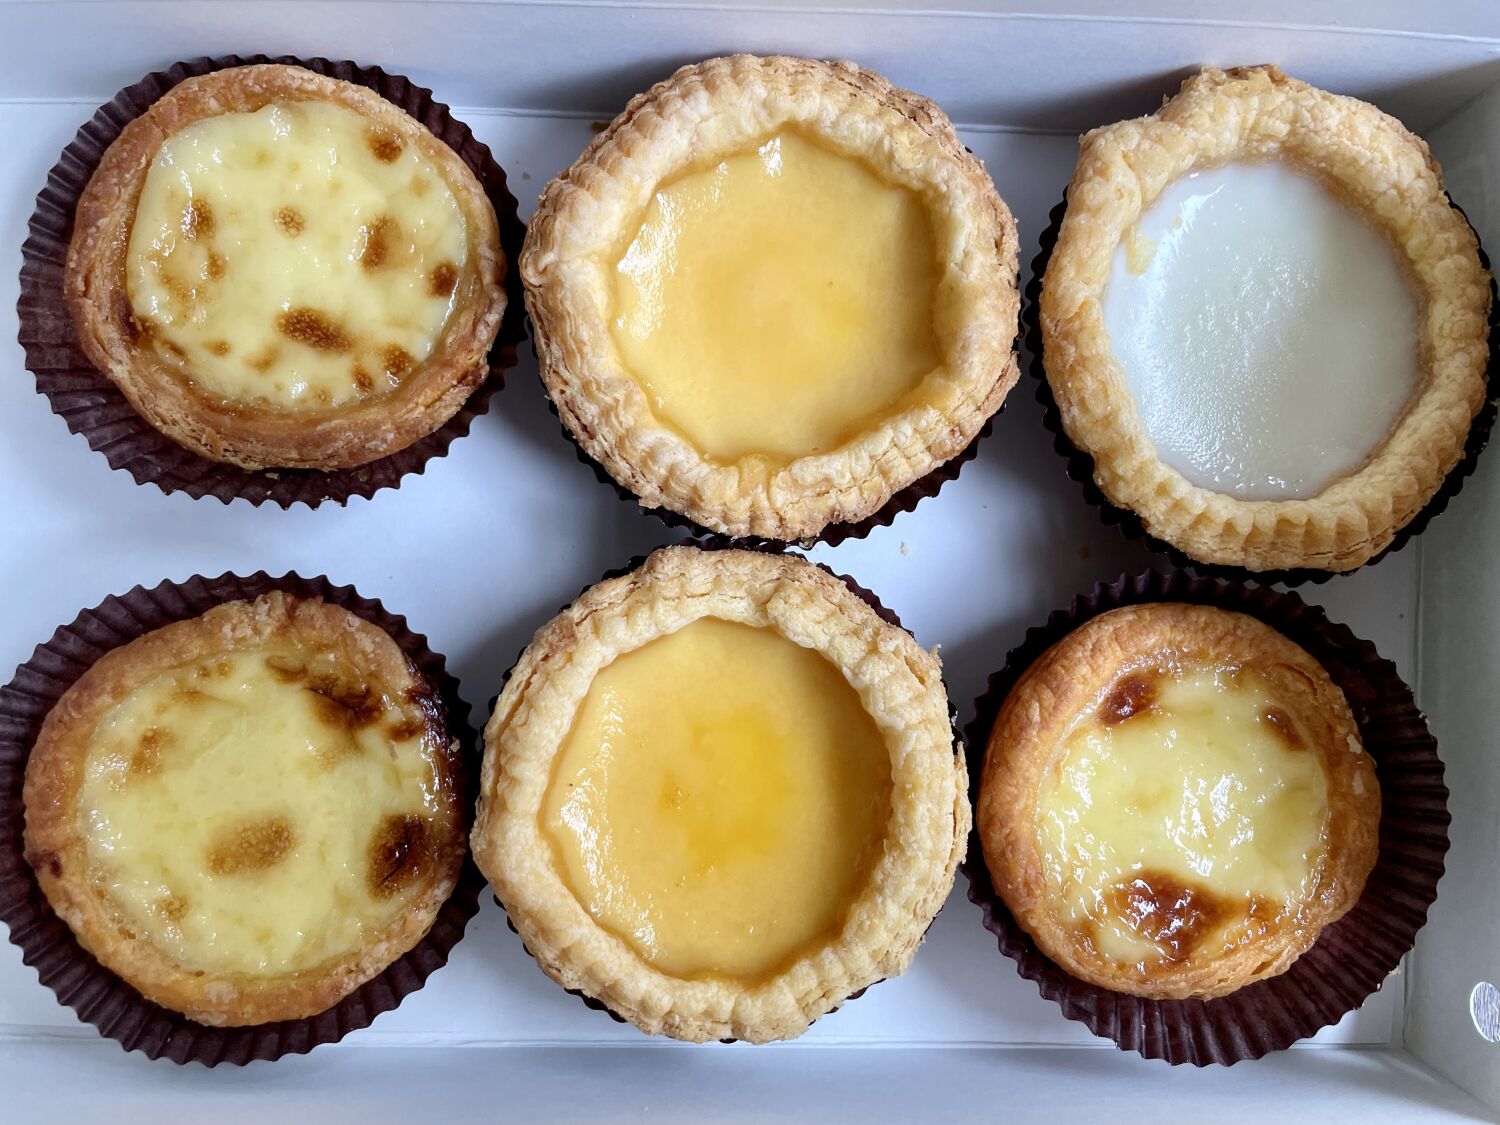 Where to find the best dan tat, the anytime egg tarts